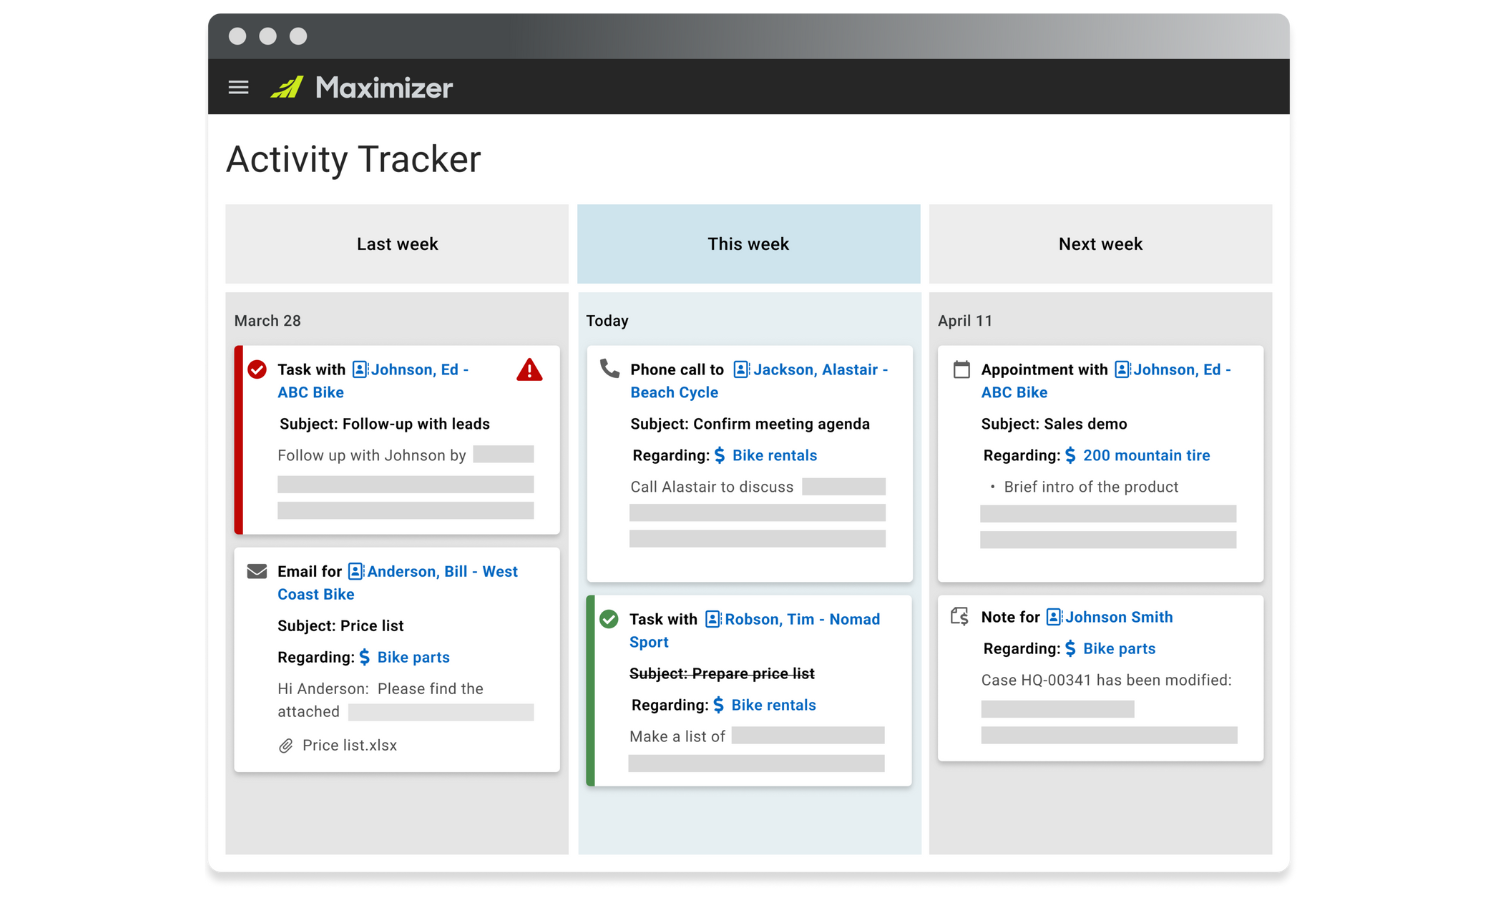 Maximizer CRM Software - Activity Tracker enables Sales Leaders to see a real-time list of their company's communication activities.